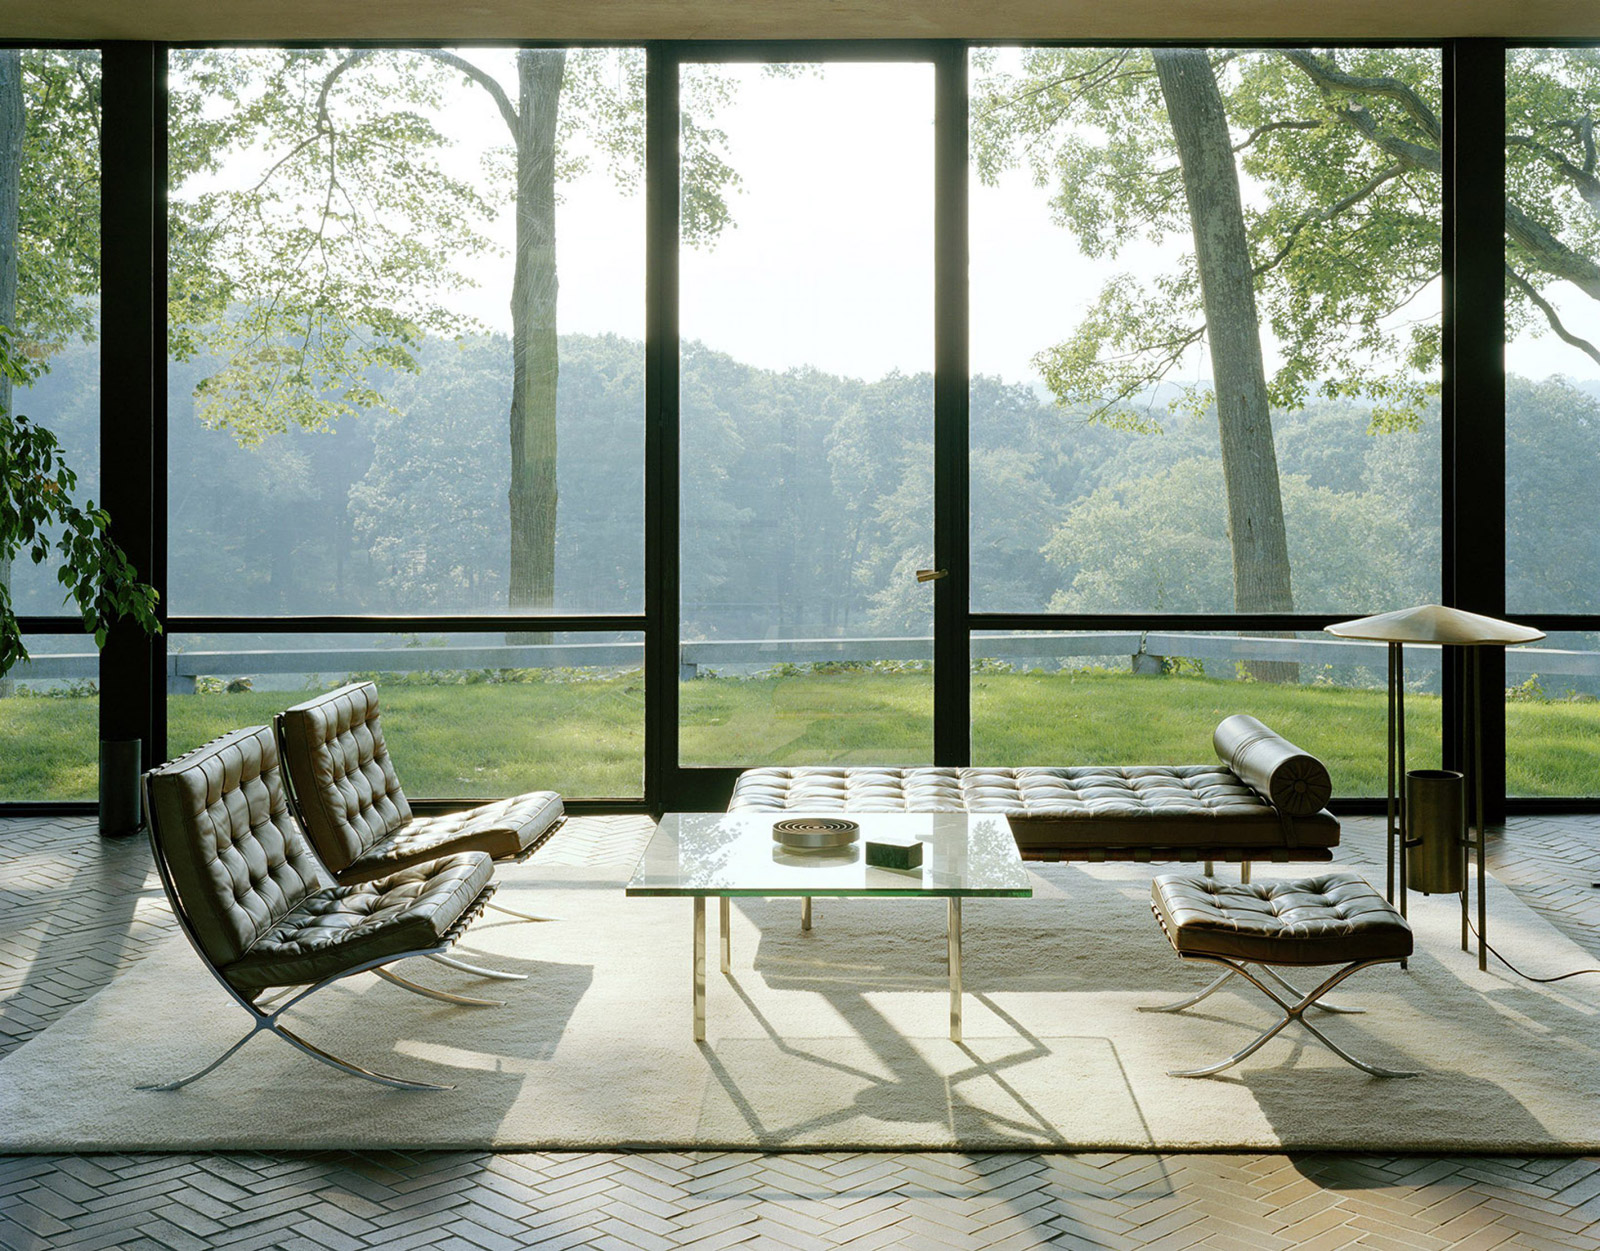 A photograph of the interior of Philip Johnson’s Glass House, where the architect deployed a carpet to indicate a zone of sociability.